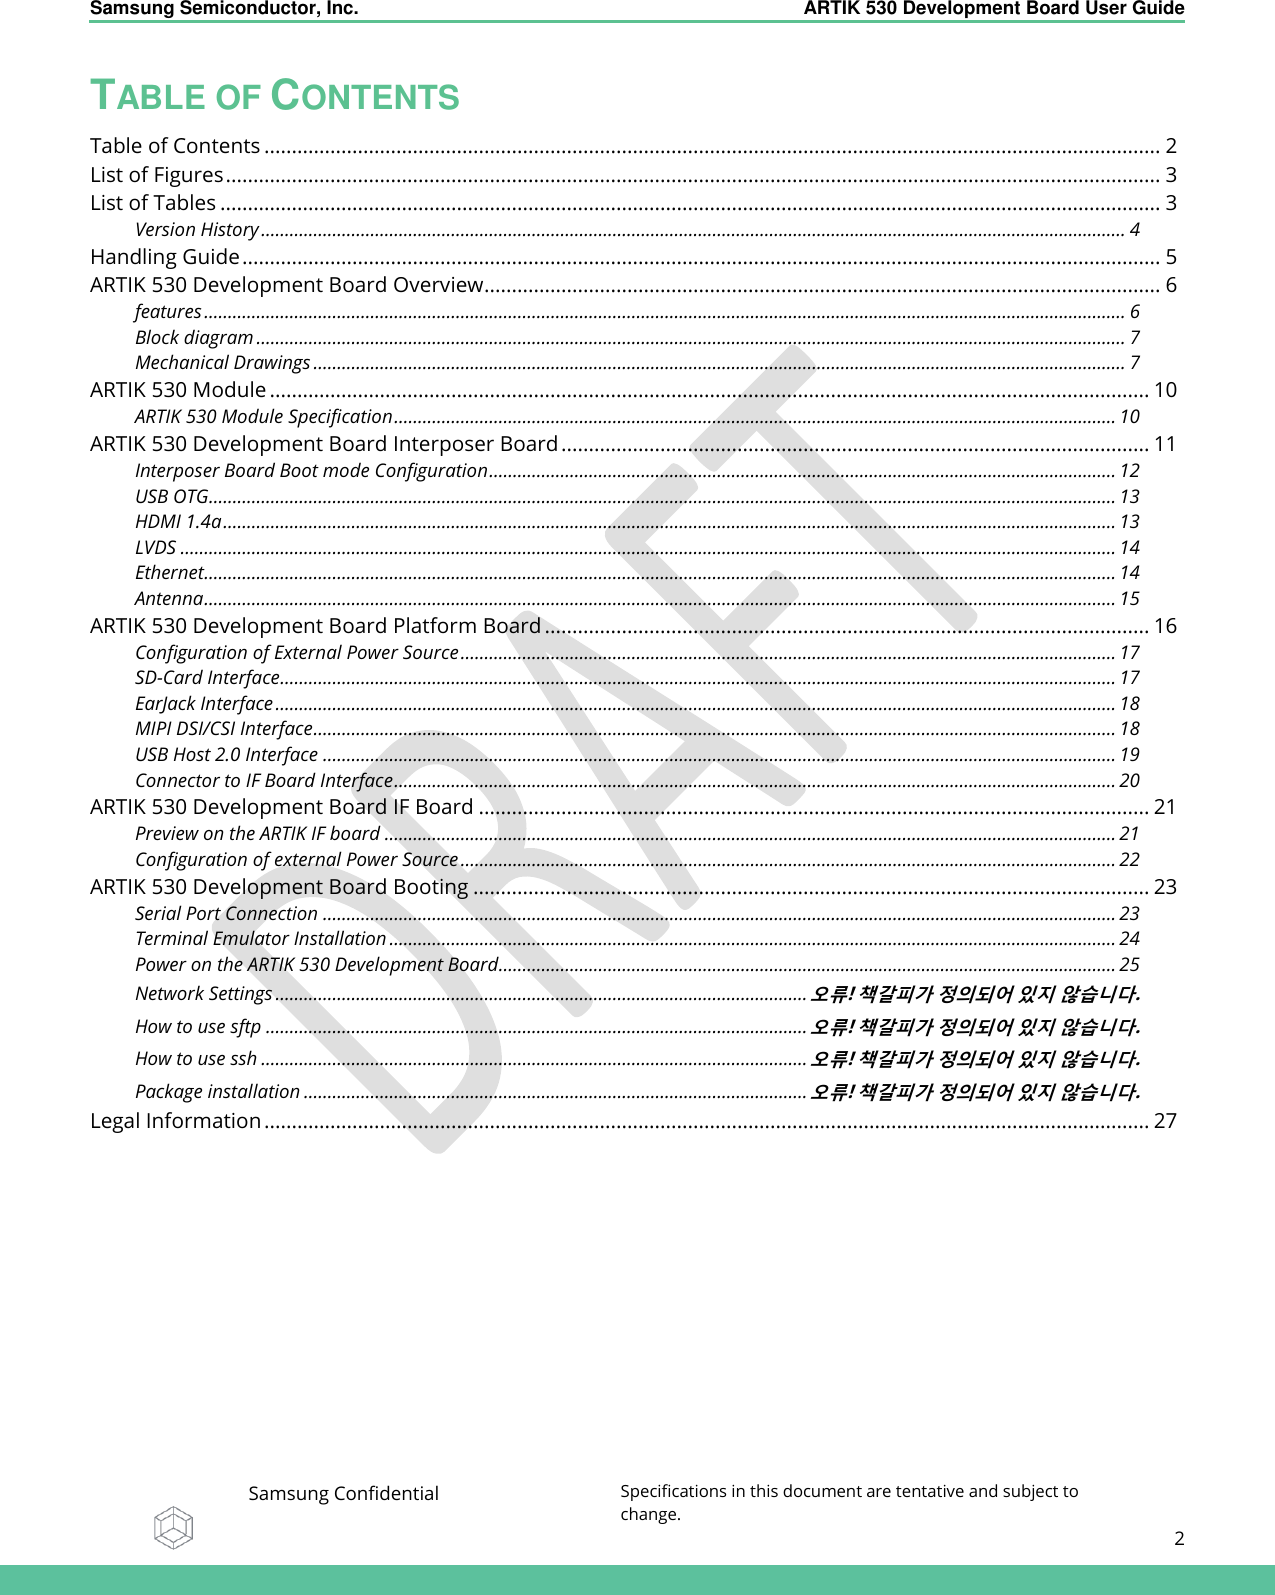    Samsung Semiconductor, Inc.  ARTIK 530 Development Board User Guide   Samsung Confidential Specifications in this document are tentative and subject to change.  2   TABLE OF CONTENTS Table of Contents ................................................................................................................................................................... 2 List of Figures .......................................................................................................................................................................... 3 List of Tables ........................................................................................................................................................................... 3 Version History ...................................................................................................................................................................................... 4 Handling Guide ....................................................................................................................................................................... 5 ARTIK 530 Development Board Overview ........................................................................................................................... 6 features .................................................................................................................................................................................................. 6 Block diagram ....................................................................................................................................................................................... 7 Mechanical Drawings ........................................................................................................................................................................... 7 ARTIK 530 Module ................................................................................................................................................................ 10 ARTIK 530 Module Specification ........................................................................................................................................................ 10 ARTIK 530 Development Board Interposer Board ........................................................................................................... 11 Interposer Board Boot mode Configuration .................................................................................................................................... 12 USB OTG ............................................................................................................................................................................................... 13 HDMI 1.4a ............................................................................................................................................................................................ 13 LVDS ..................................................................................................................................................................................................... 14 Ethernet................................................................................................................................................................................................ 14 Antenna ................................................................................................................................................................................................ 15 ARTIK 530 Development Board Platform Board .............................................................................................................. 16 Configuration of External Power Source .......................................................................................................................................... 17 SD-Card Interface................................................................................................................................................................................ 17 EarJack Interface ................................................................................................................................................................................. 18 MIPI DSI/CSI Interface ......................................................................................................................................................................... 18 USB Host 2.0 Interface ....................................................................................................................................................................... 19 Connector to IF Board Interface ........................................................................................................................................................ 20 ARTIK 530 Development Board IF Board .......................................................................................................................... 21 Preview on the ARTIK IF board .......................................................................................................................................................... 21 Configuration of external Power Source .......................................................................................................................................... 22 ARTIK 530 Development Board Booting ........................................................................................................................... 23 Serial Port Connection ....................................................................................................................................................................... 23 Terminal Emulator Installation ......................................................................................................................................................... 24 Power on the ARTIK 530 Development Board.................................................................................................................................. 25 Network Settings ................................................................................................................ 오류! 책갈피가 정의되어 있지 않습니다. How to use sftp .................................................................................................................. 오류! 책갈피가 정의되어 있지 않습니다. How to use ssh ................................................................................................................... 오류! 책갈피가 정의되어 있지 않습니다. Package installation .......................................................................................................... 오류! 책갈피가 정의되어 있지 않습니다. Legal Information ................................................................................................................................................................. 27  